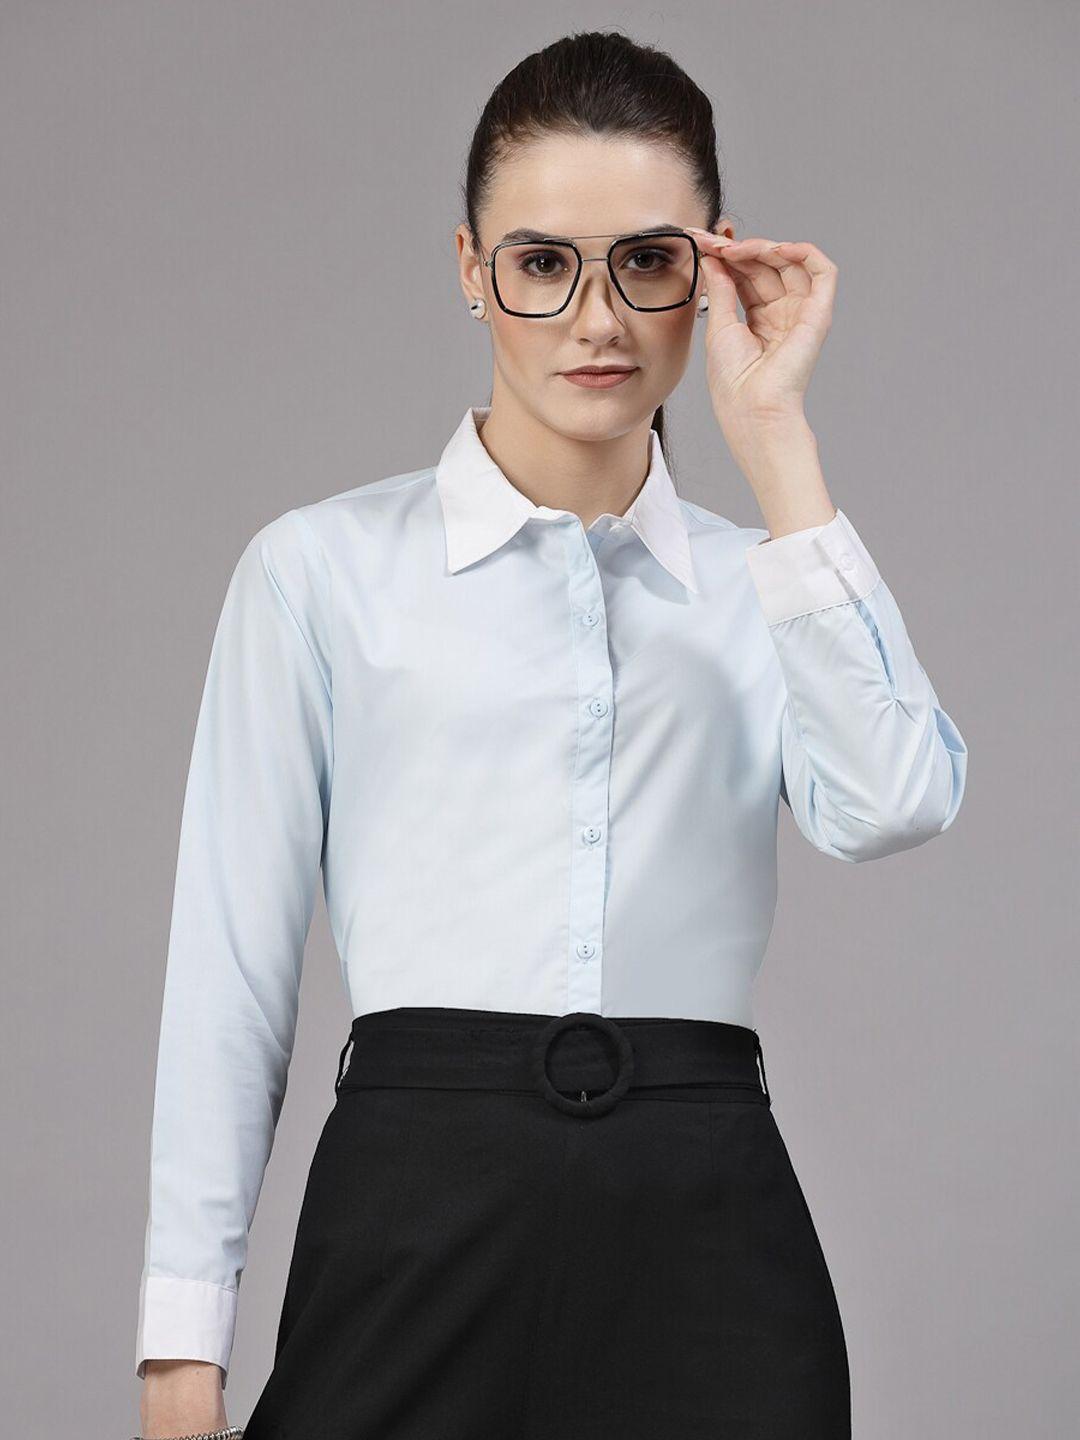 style quotient smart spread collar formal shirt